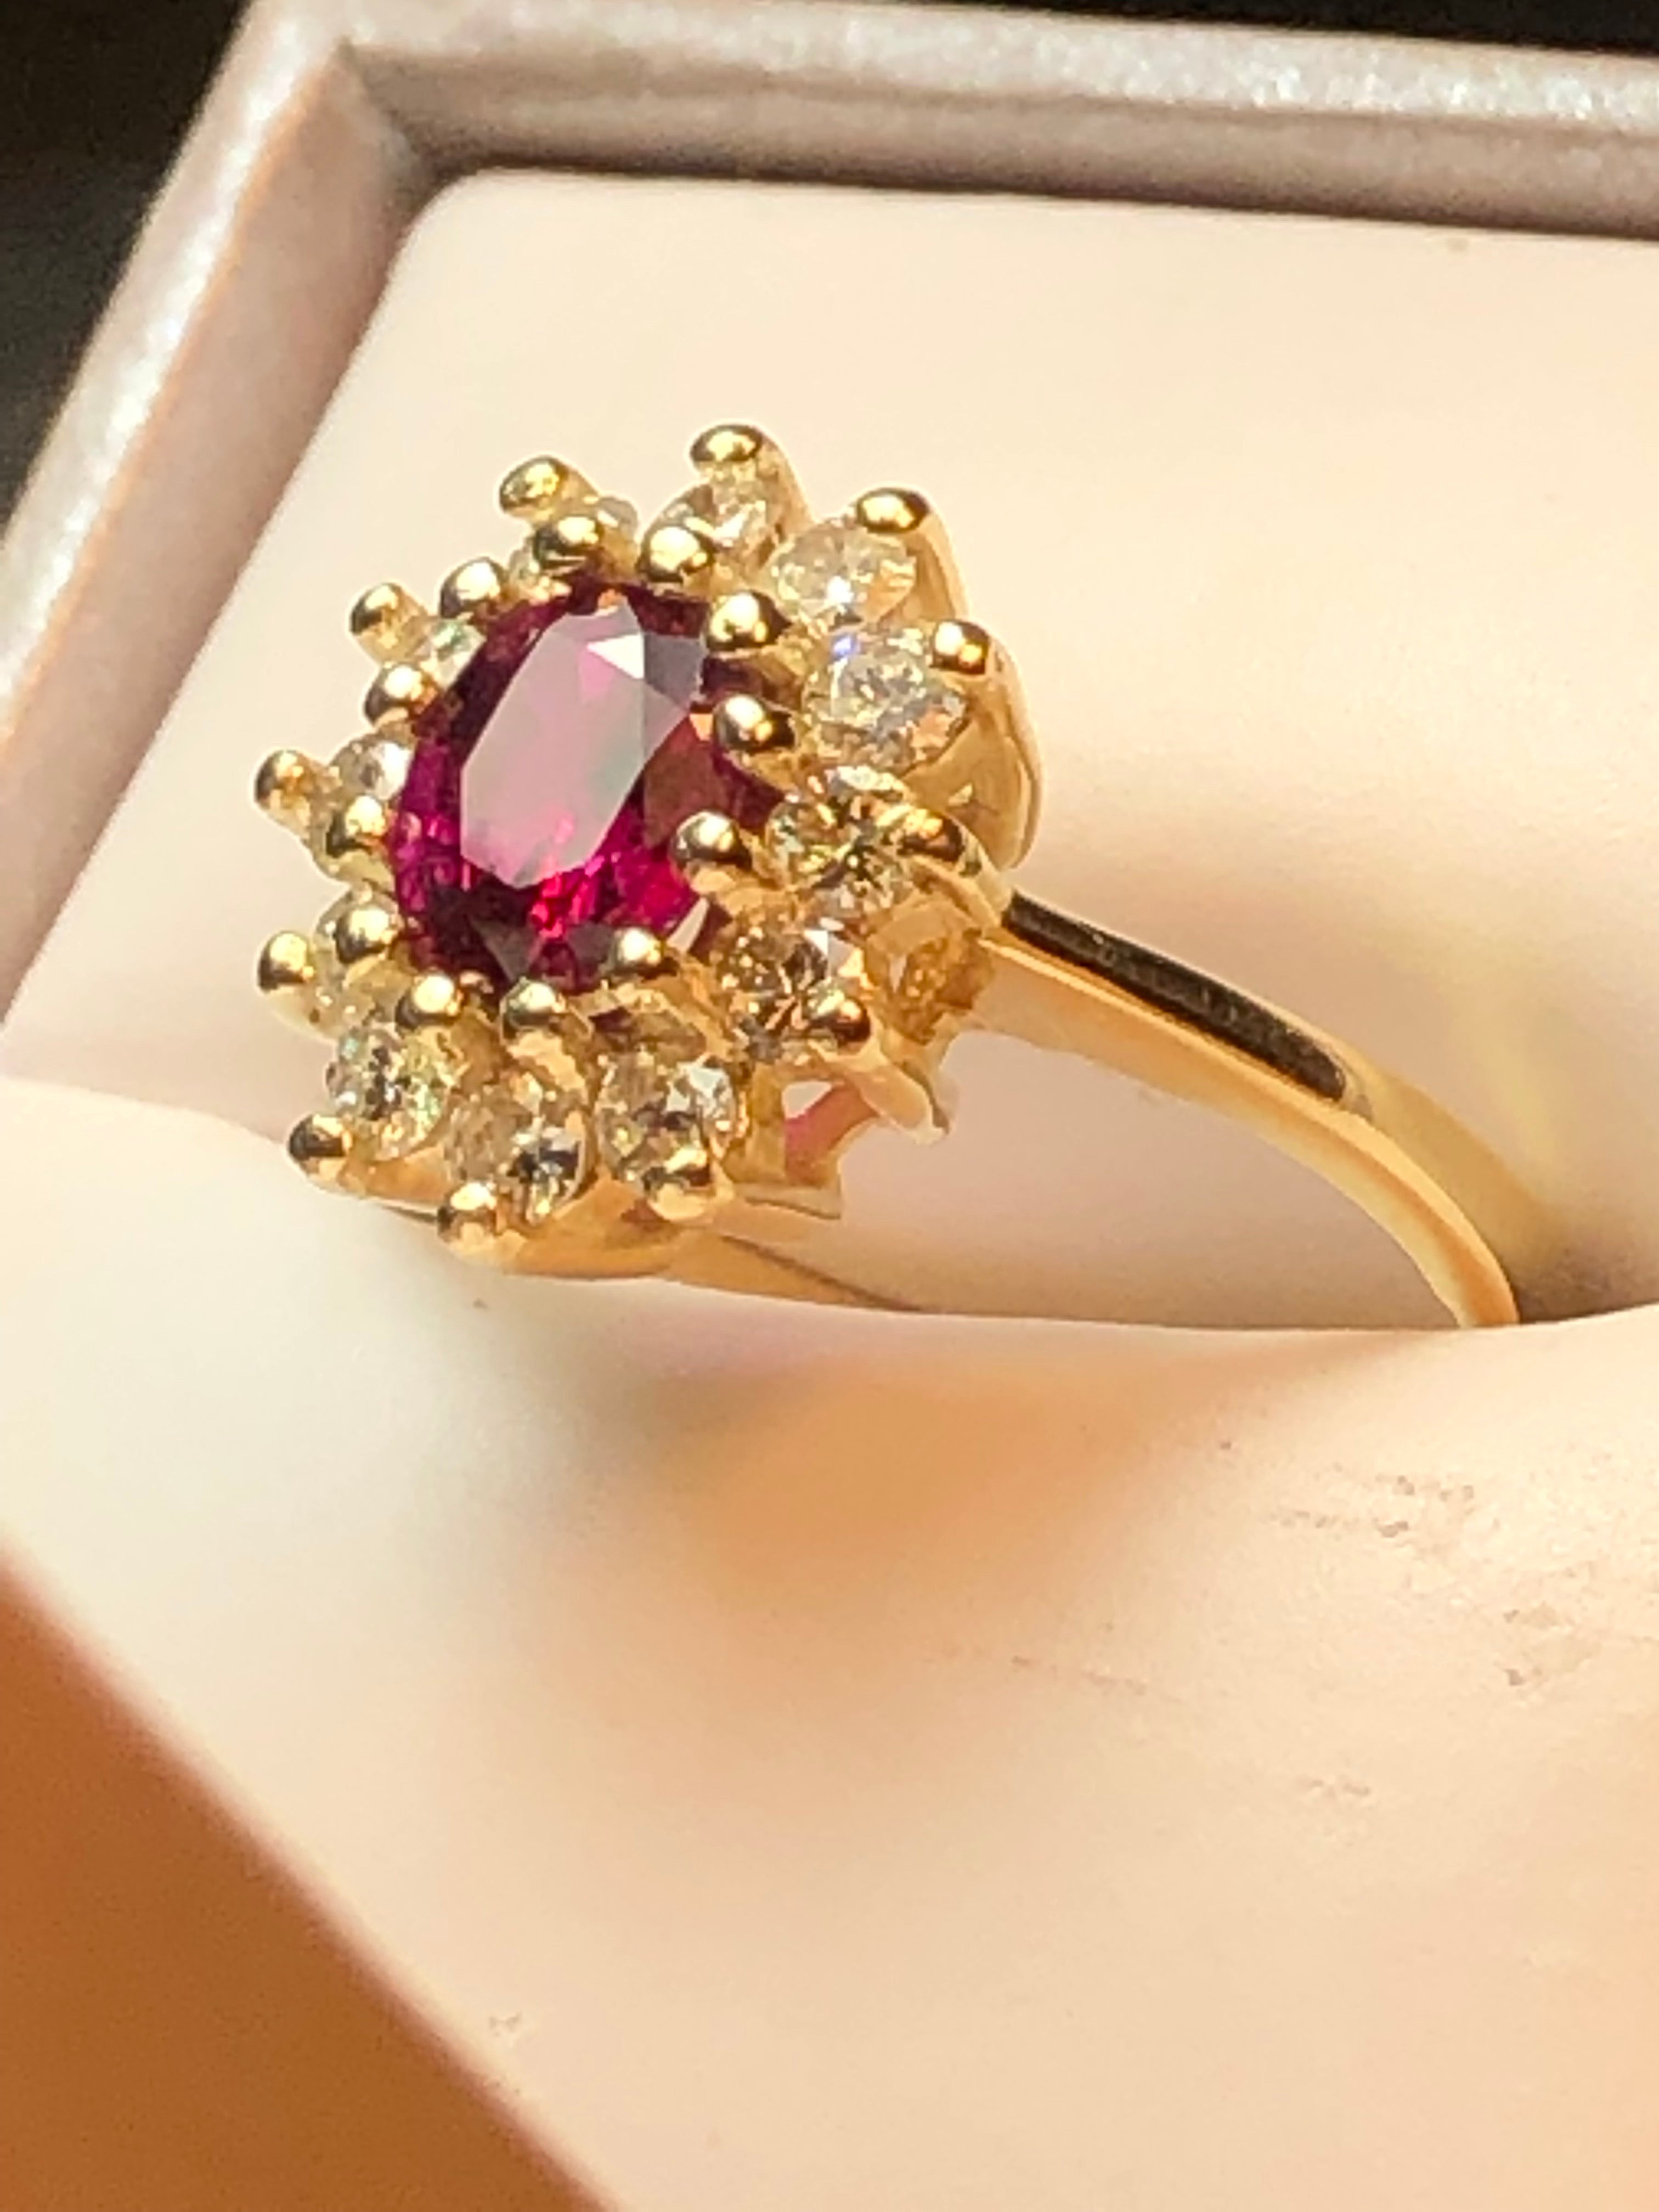 Natural Ruby with Diamonds